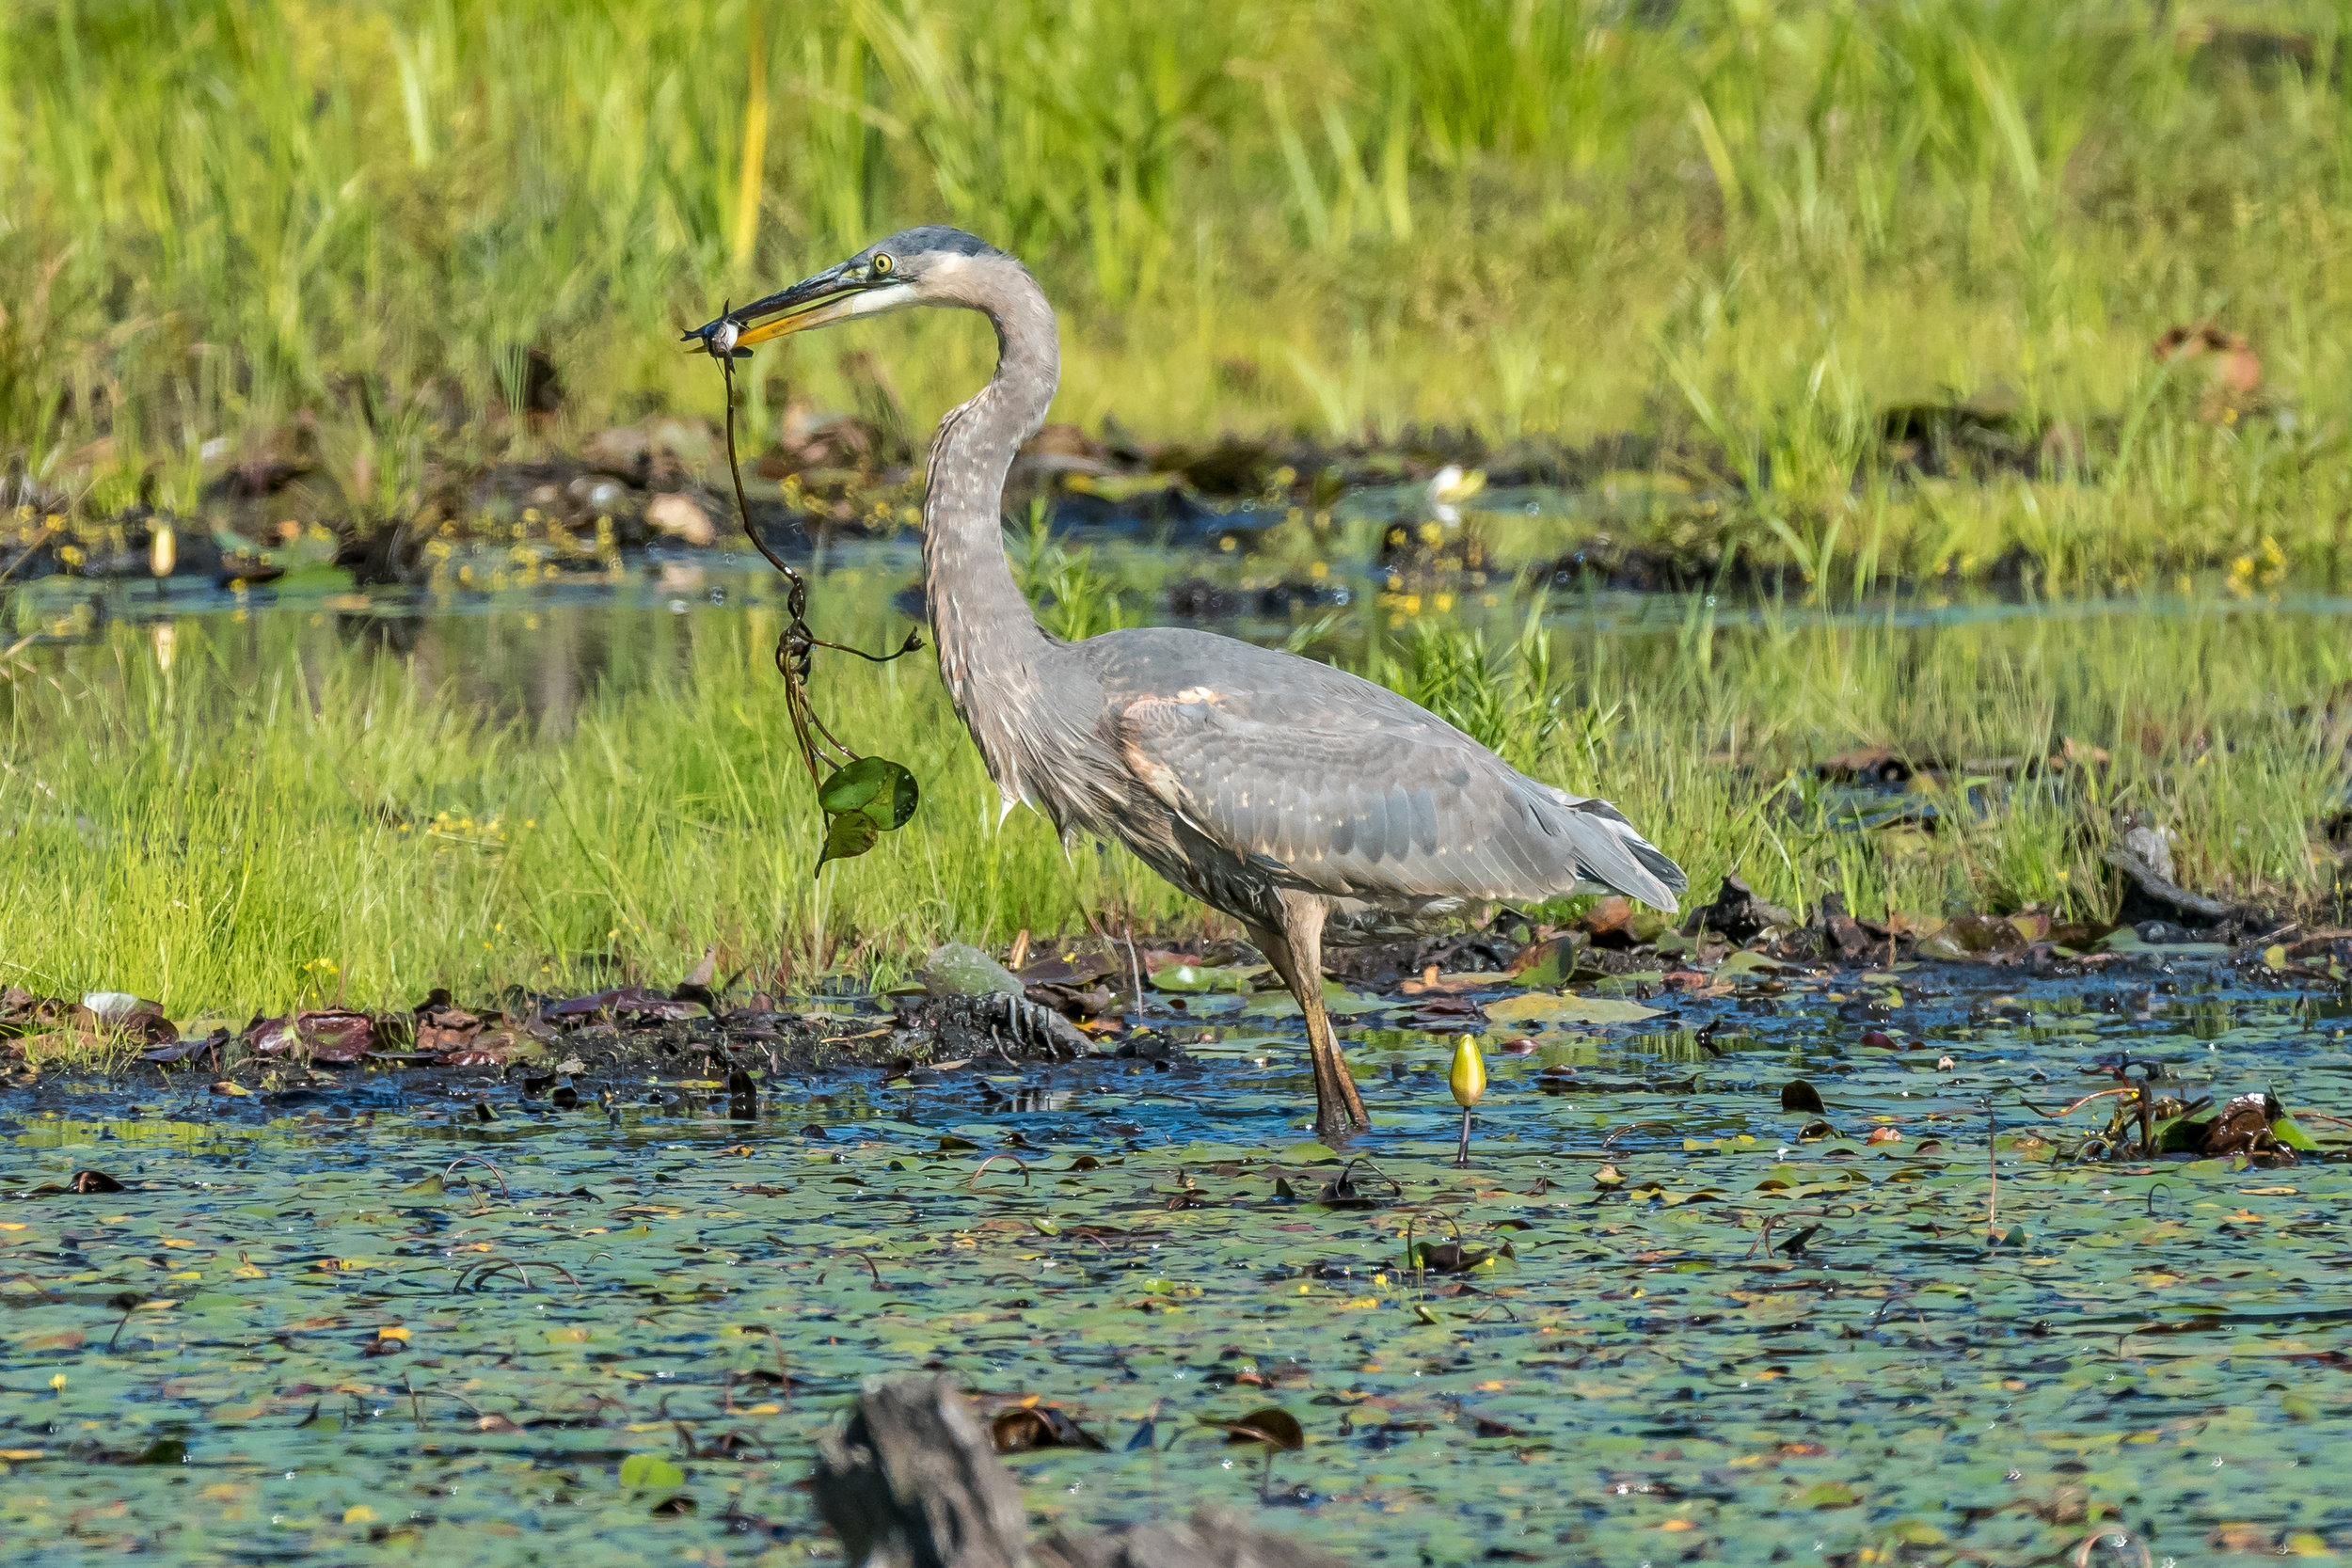   Im going to miss these goofy guys when they head out for the winter. &nbsp;This great blue heron got a salad with his catfish ! &nbsp;9/18/16  